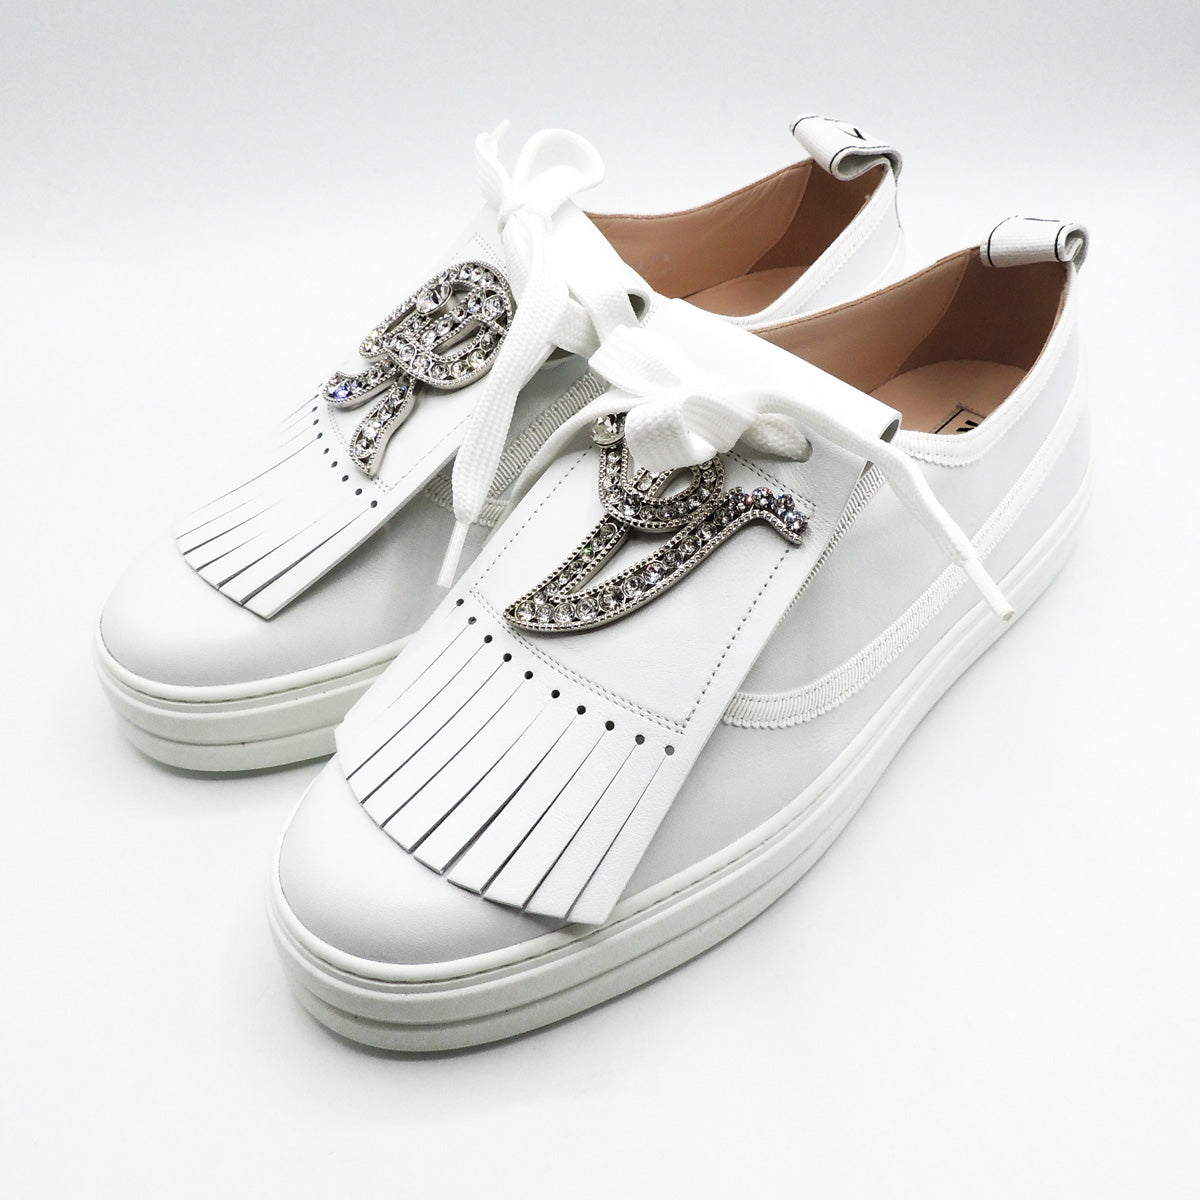 Roger Vivier Jewel Trainers in White UK 6